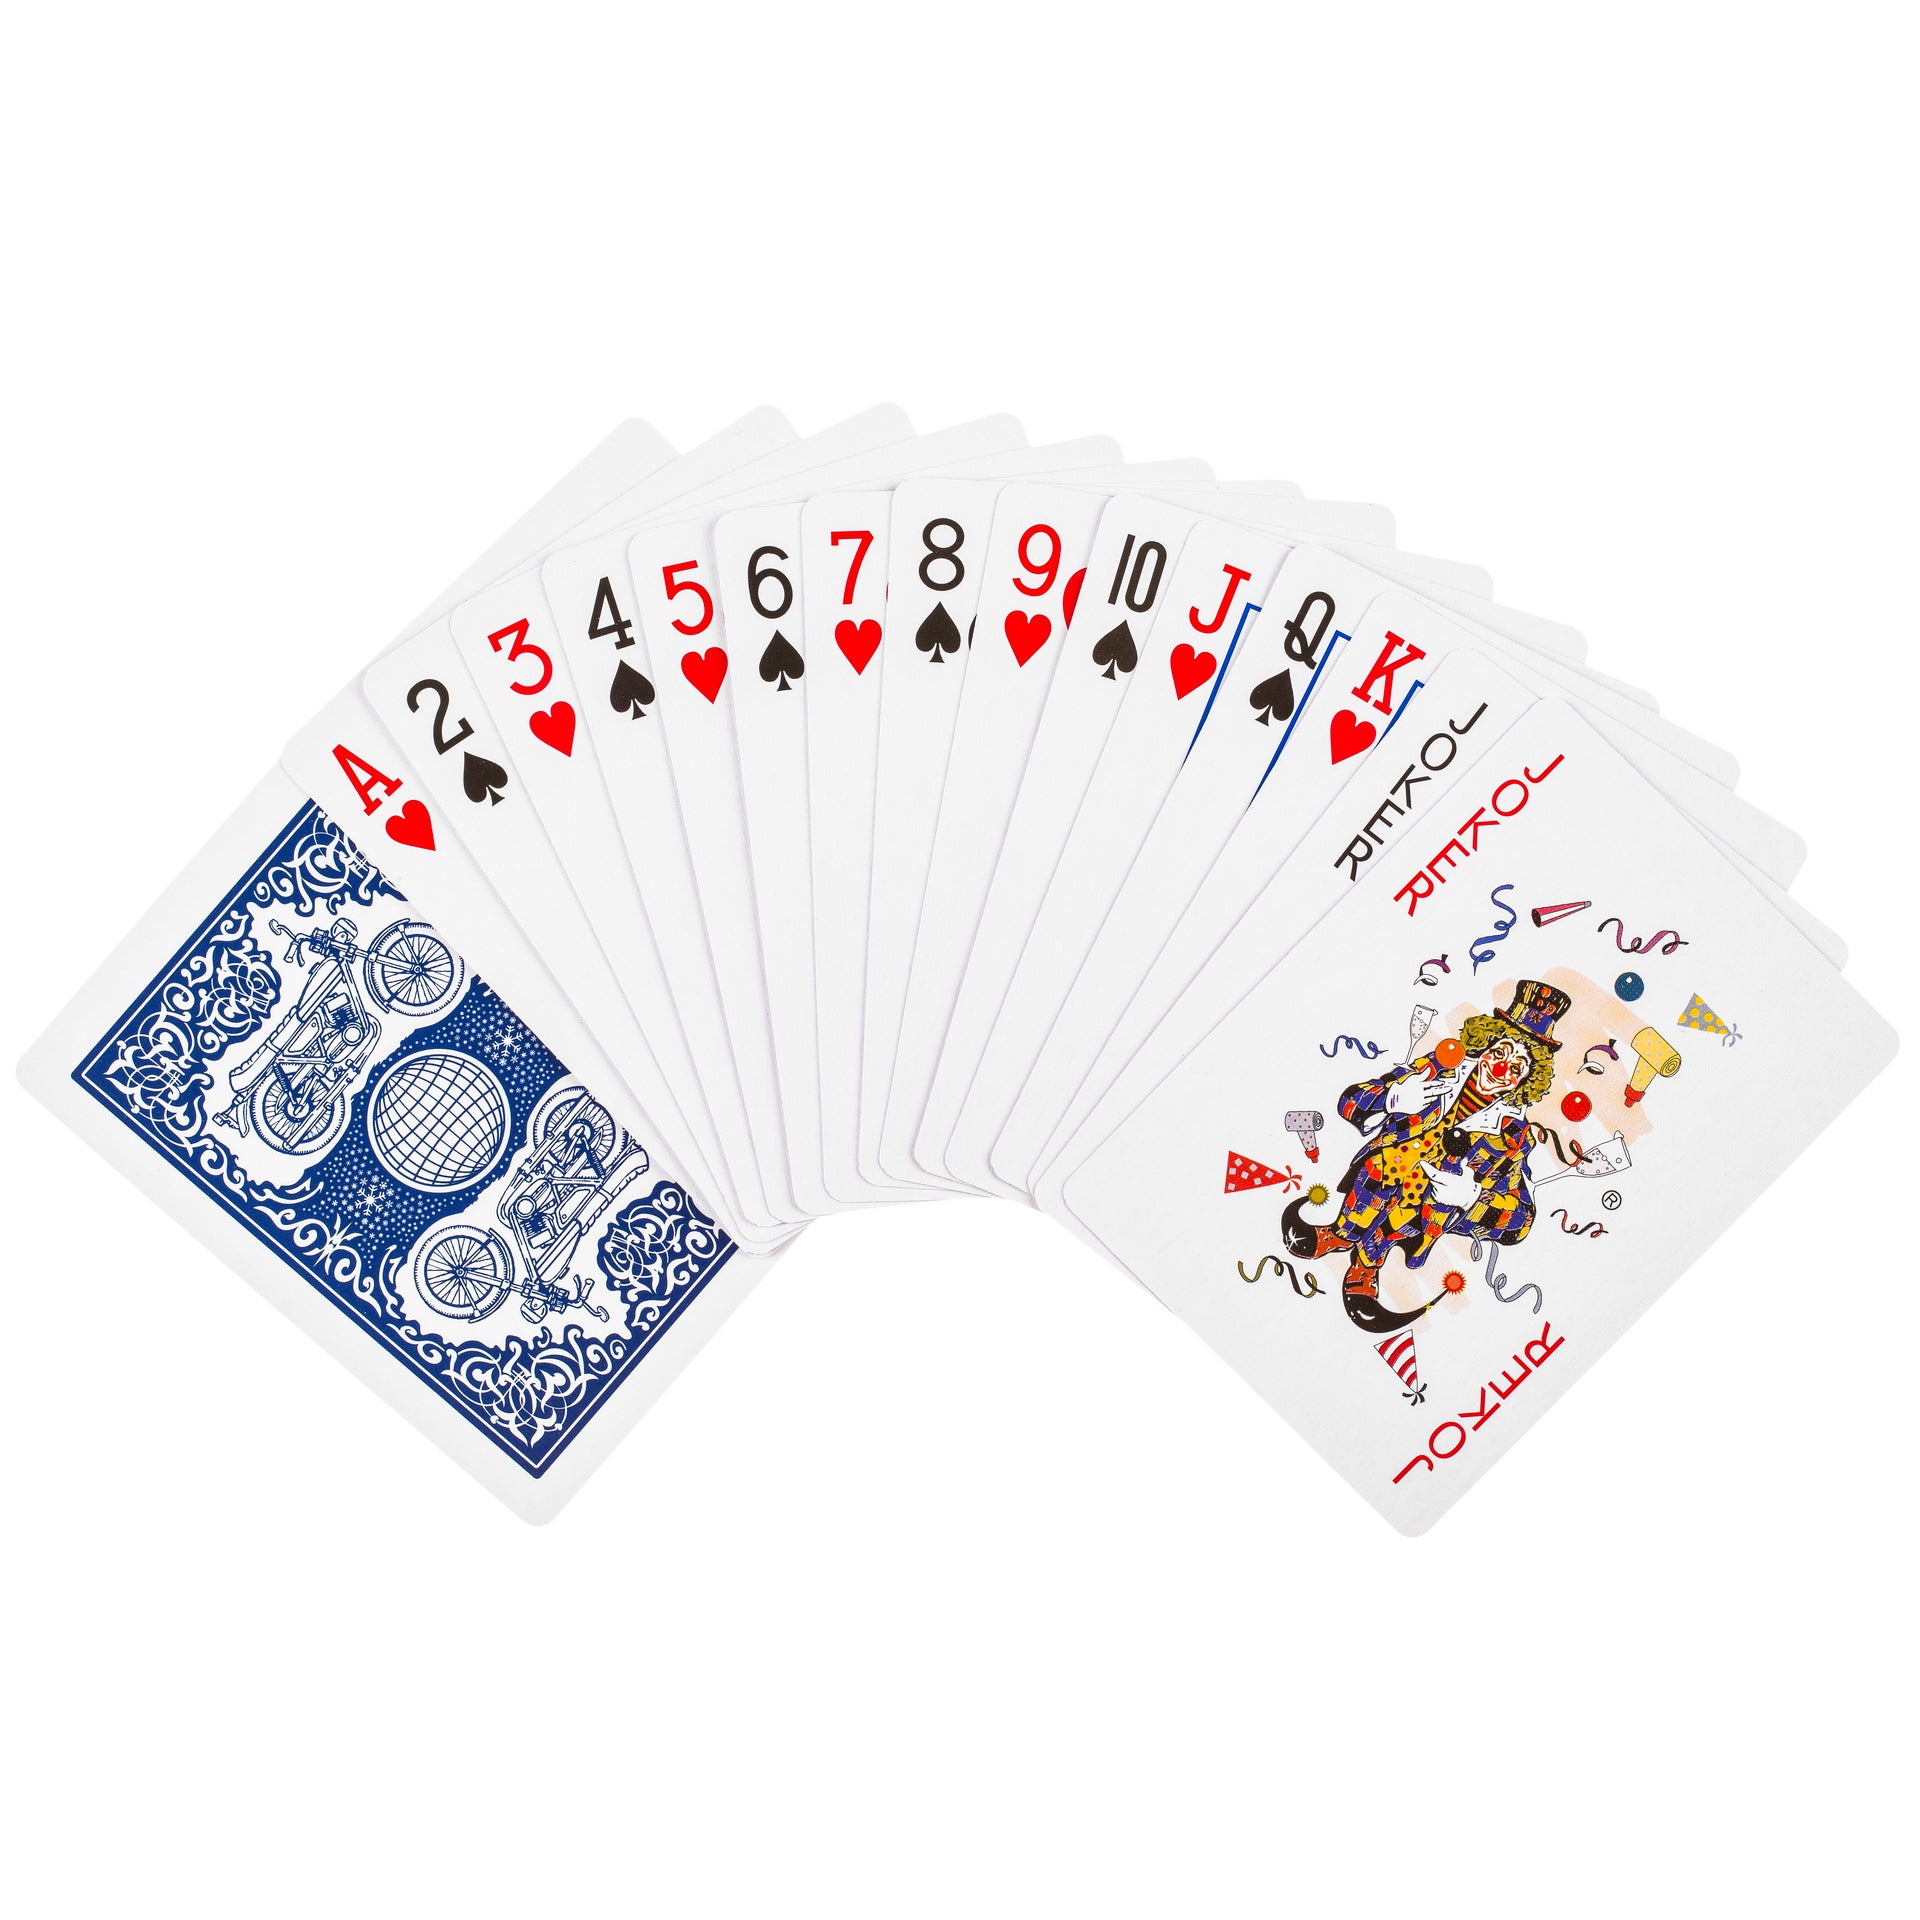 OTRON Playing Cards, Poker Size Standard Index,12 Decks of Cards (Blue), for Blackjack, Euchre, Canasta, Pinochle Card Game, Poker Cards.